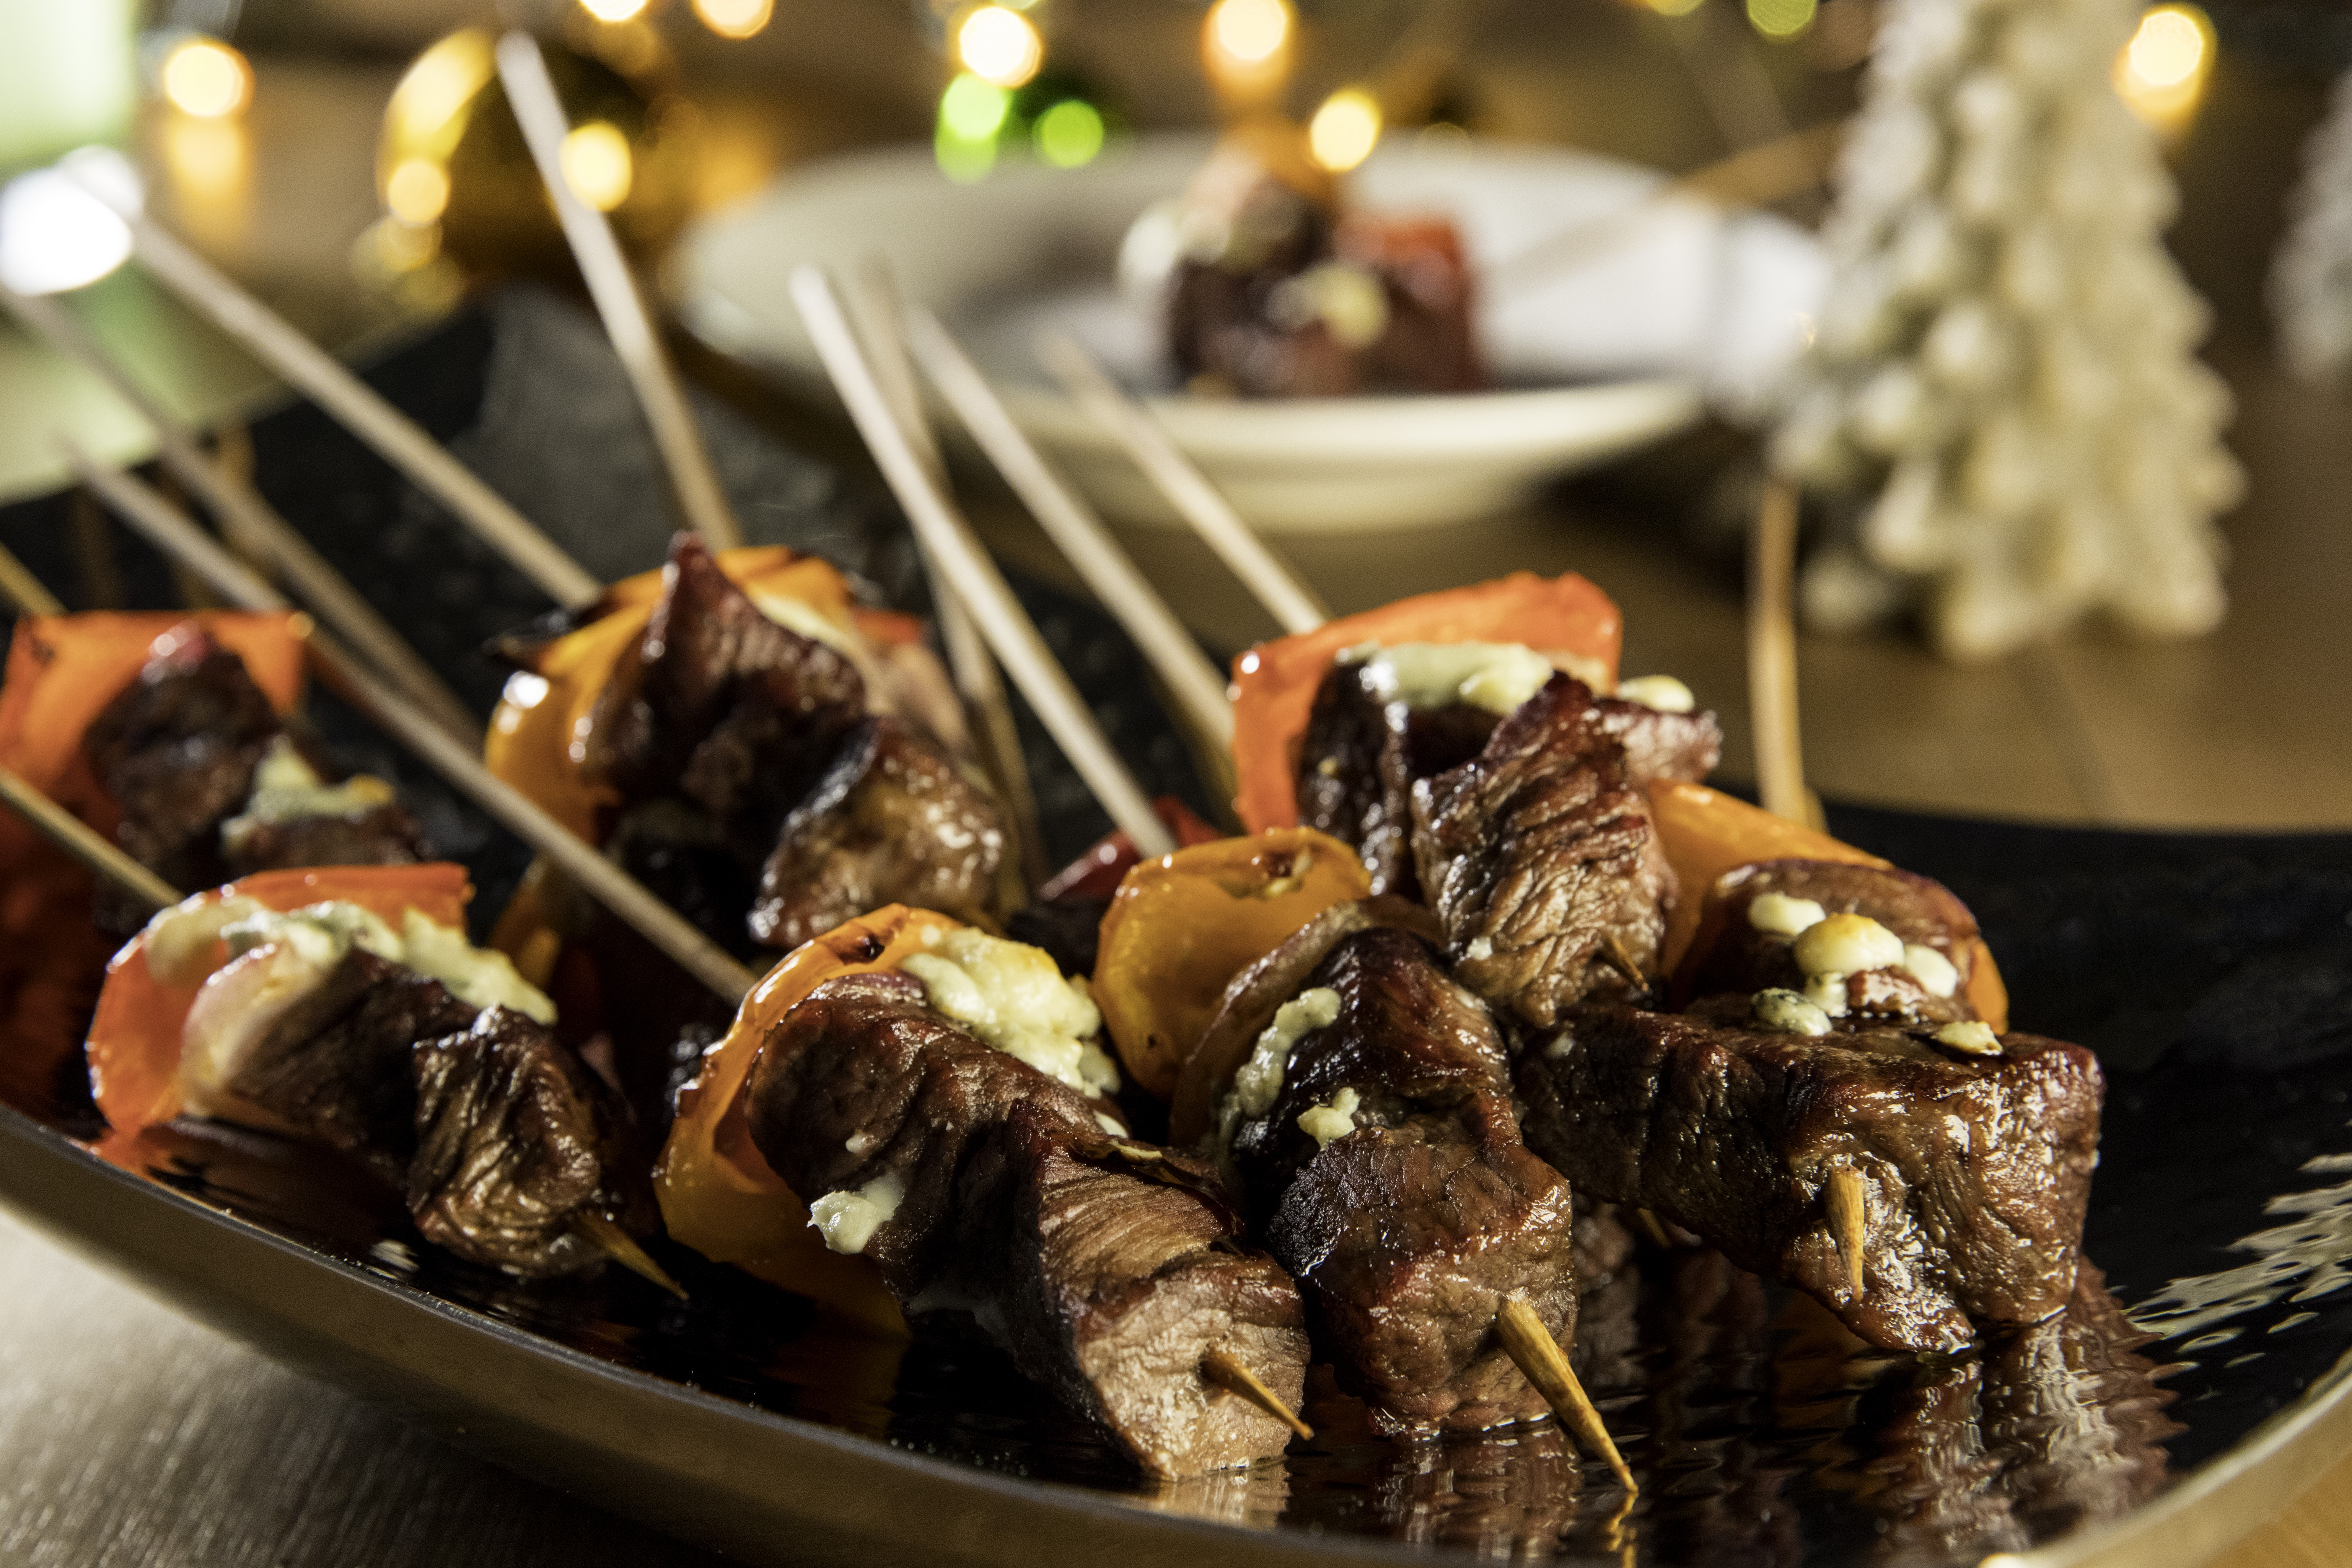 These mouthwatering skewers layer sirloin steak, crumbled bleu cheese, garlic and peppers, only to be topped with a balsamic glaze. The flavor of these brochettes is out-of-this-world.